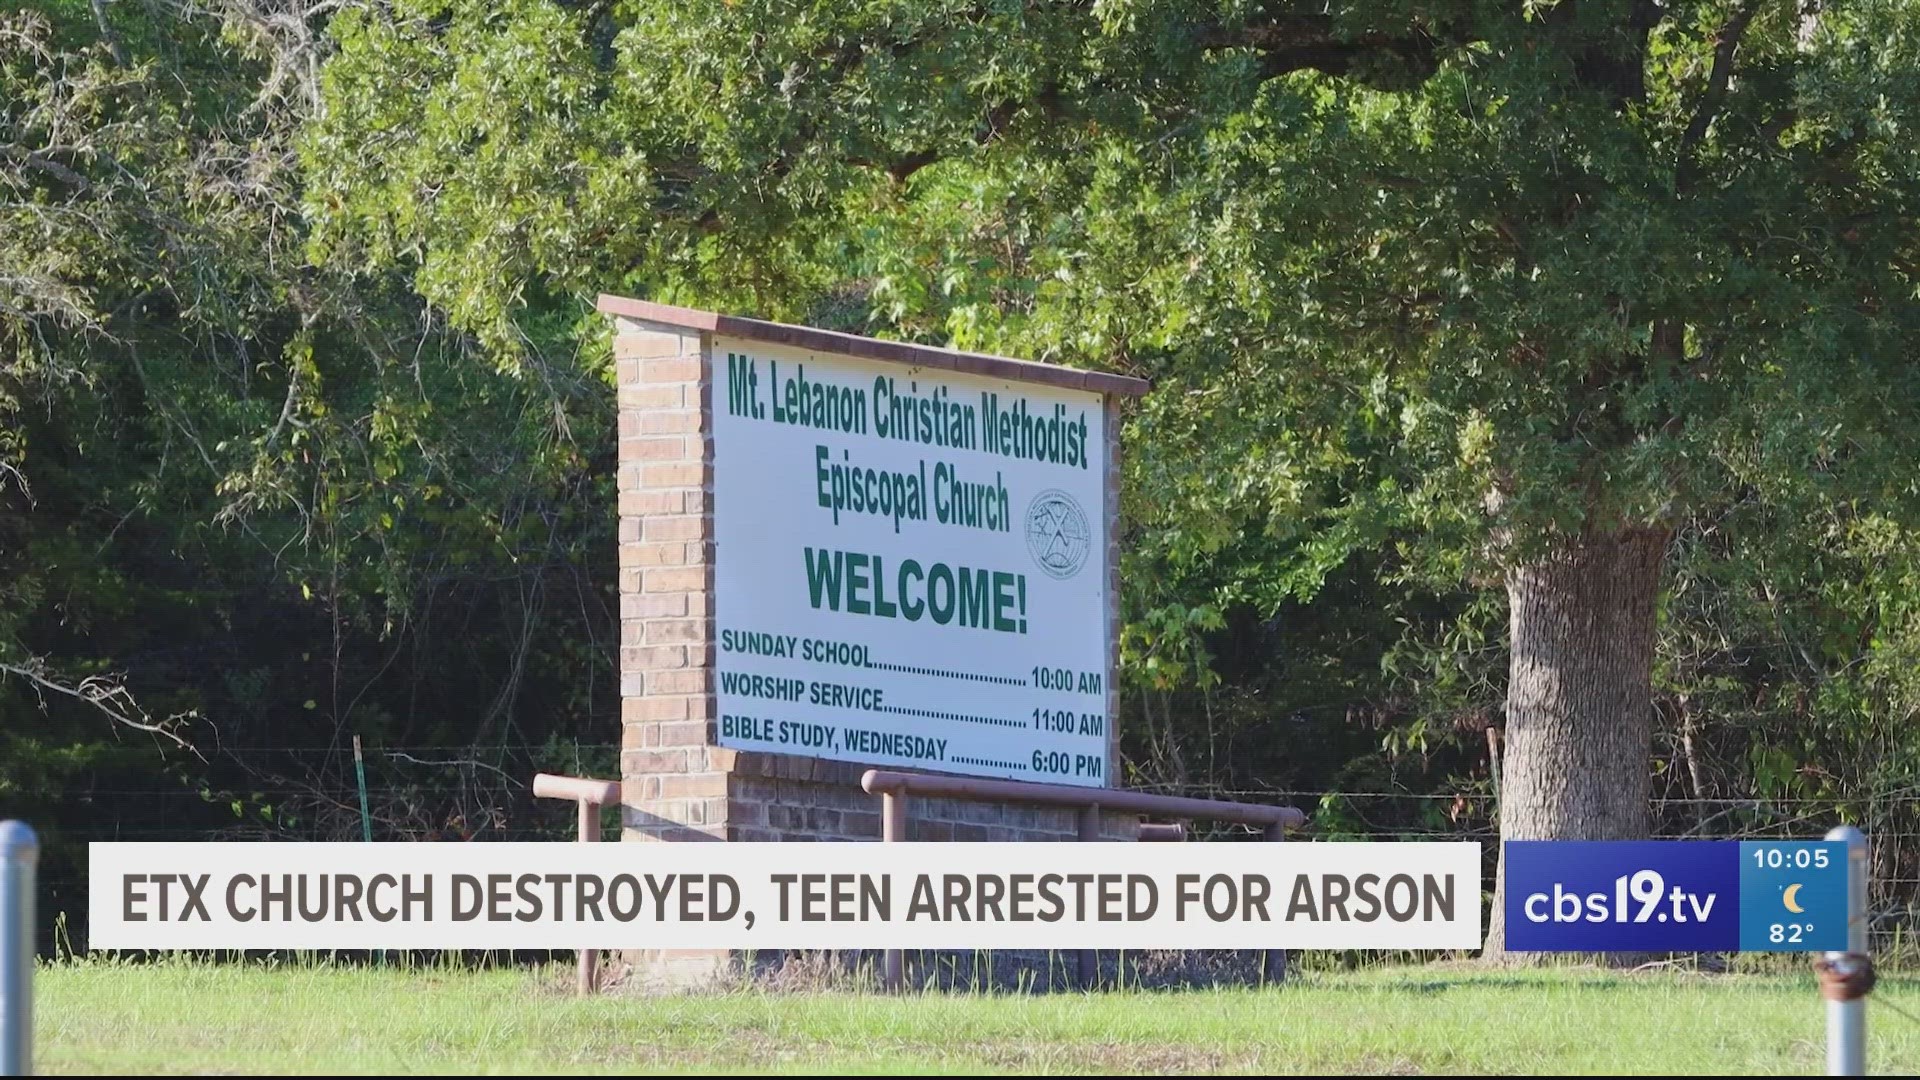 The 16-year-old was booked into the Gregg County Juvenile Detention Facility.